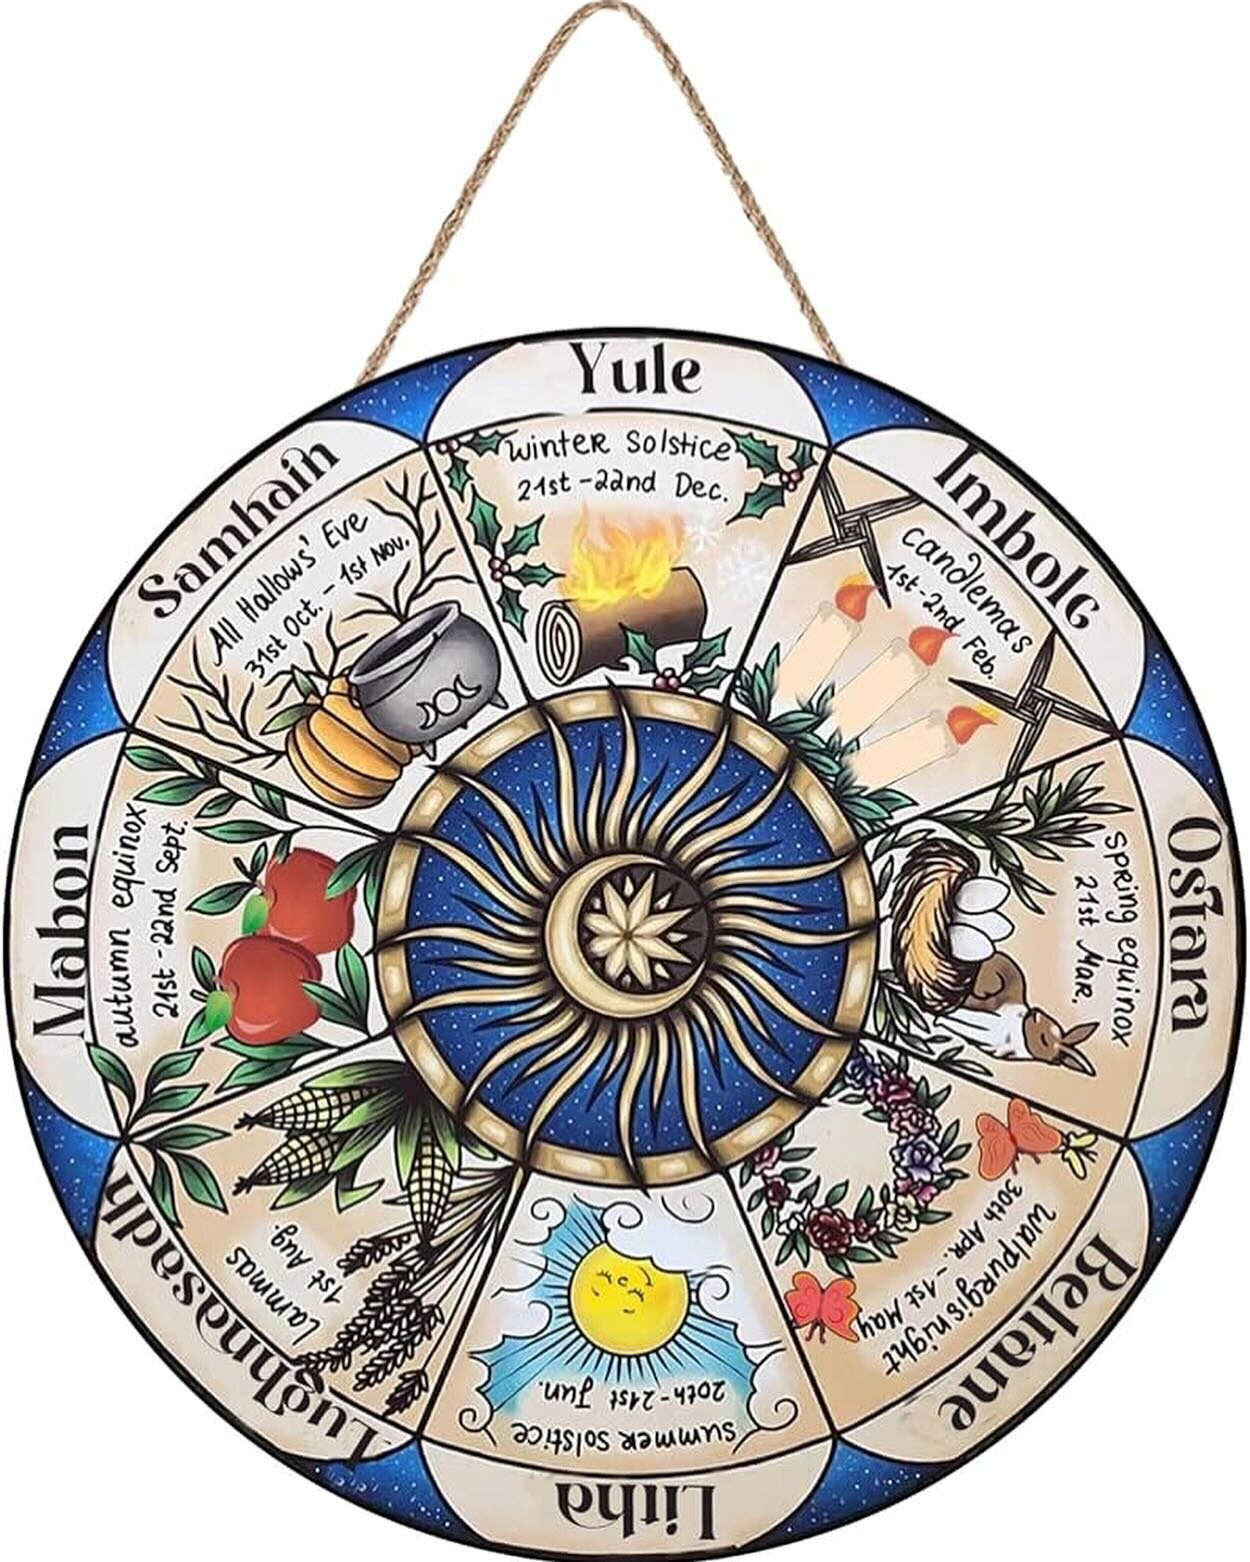 HAPPY IMBOLC

Imbolc is a Gaeilic earth celebration marking the halfway point between the Winter Solstice &amp; Spring Equinox.&nbsp; Imbolc translates to ewe&rsquo;s milk and &lsquo;in the belly&rsquo;...suggesting that spring is near and the earth 